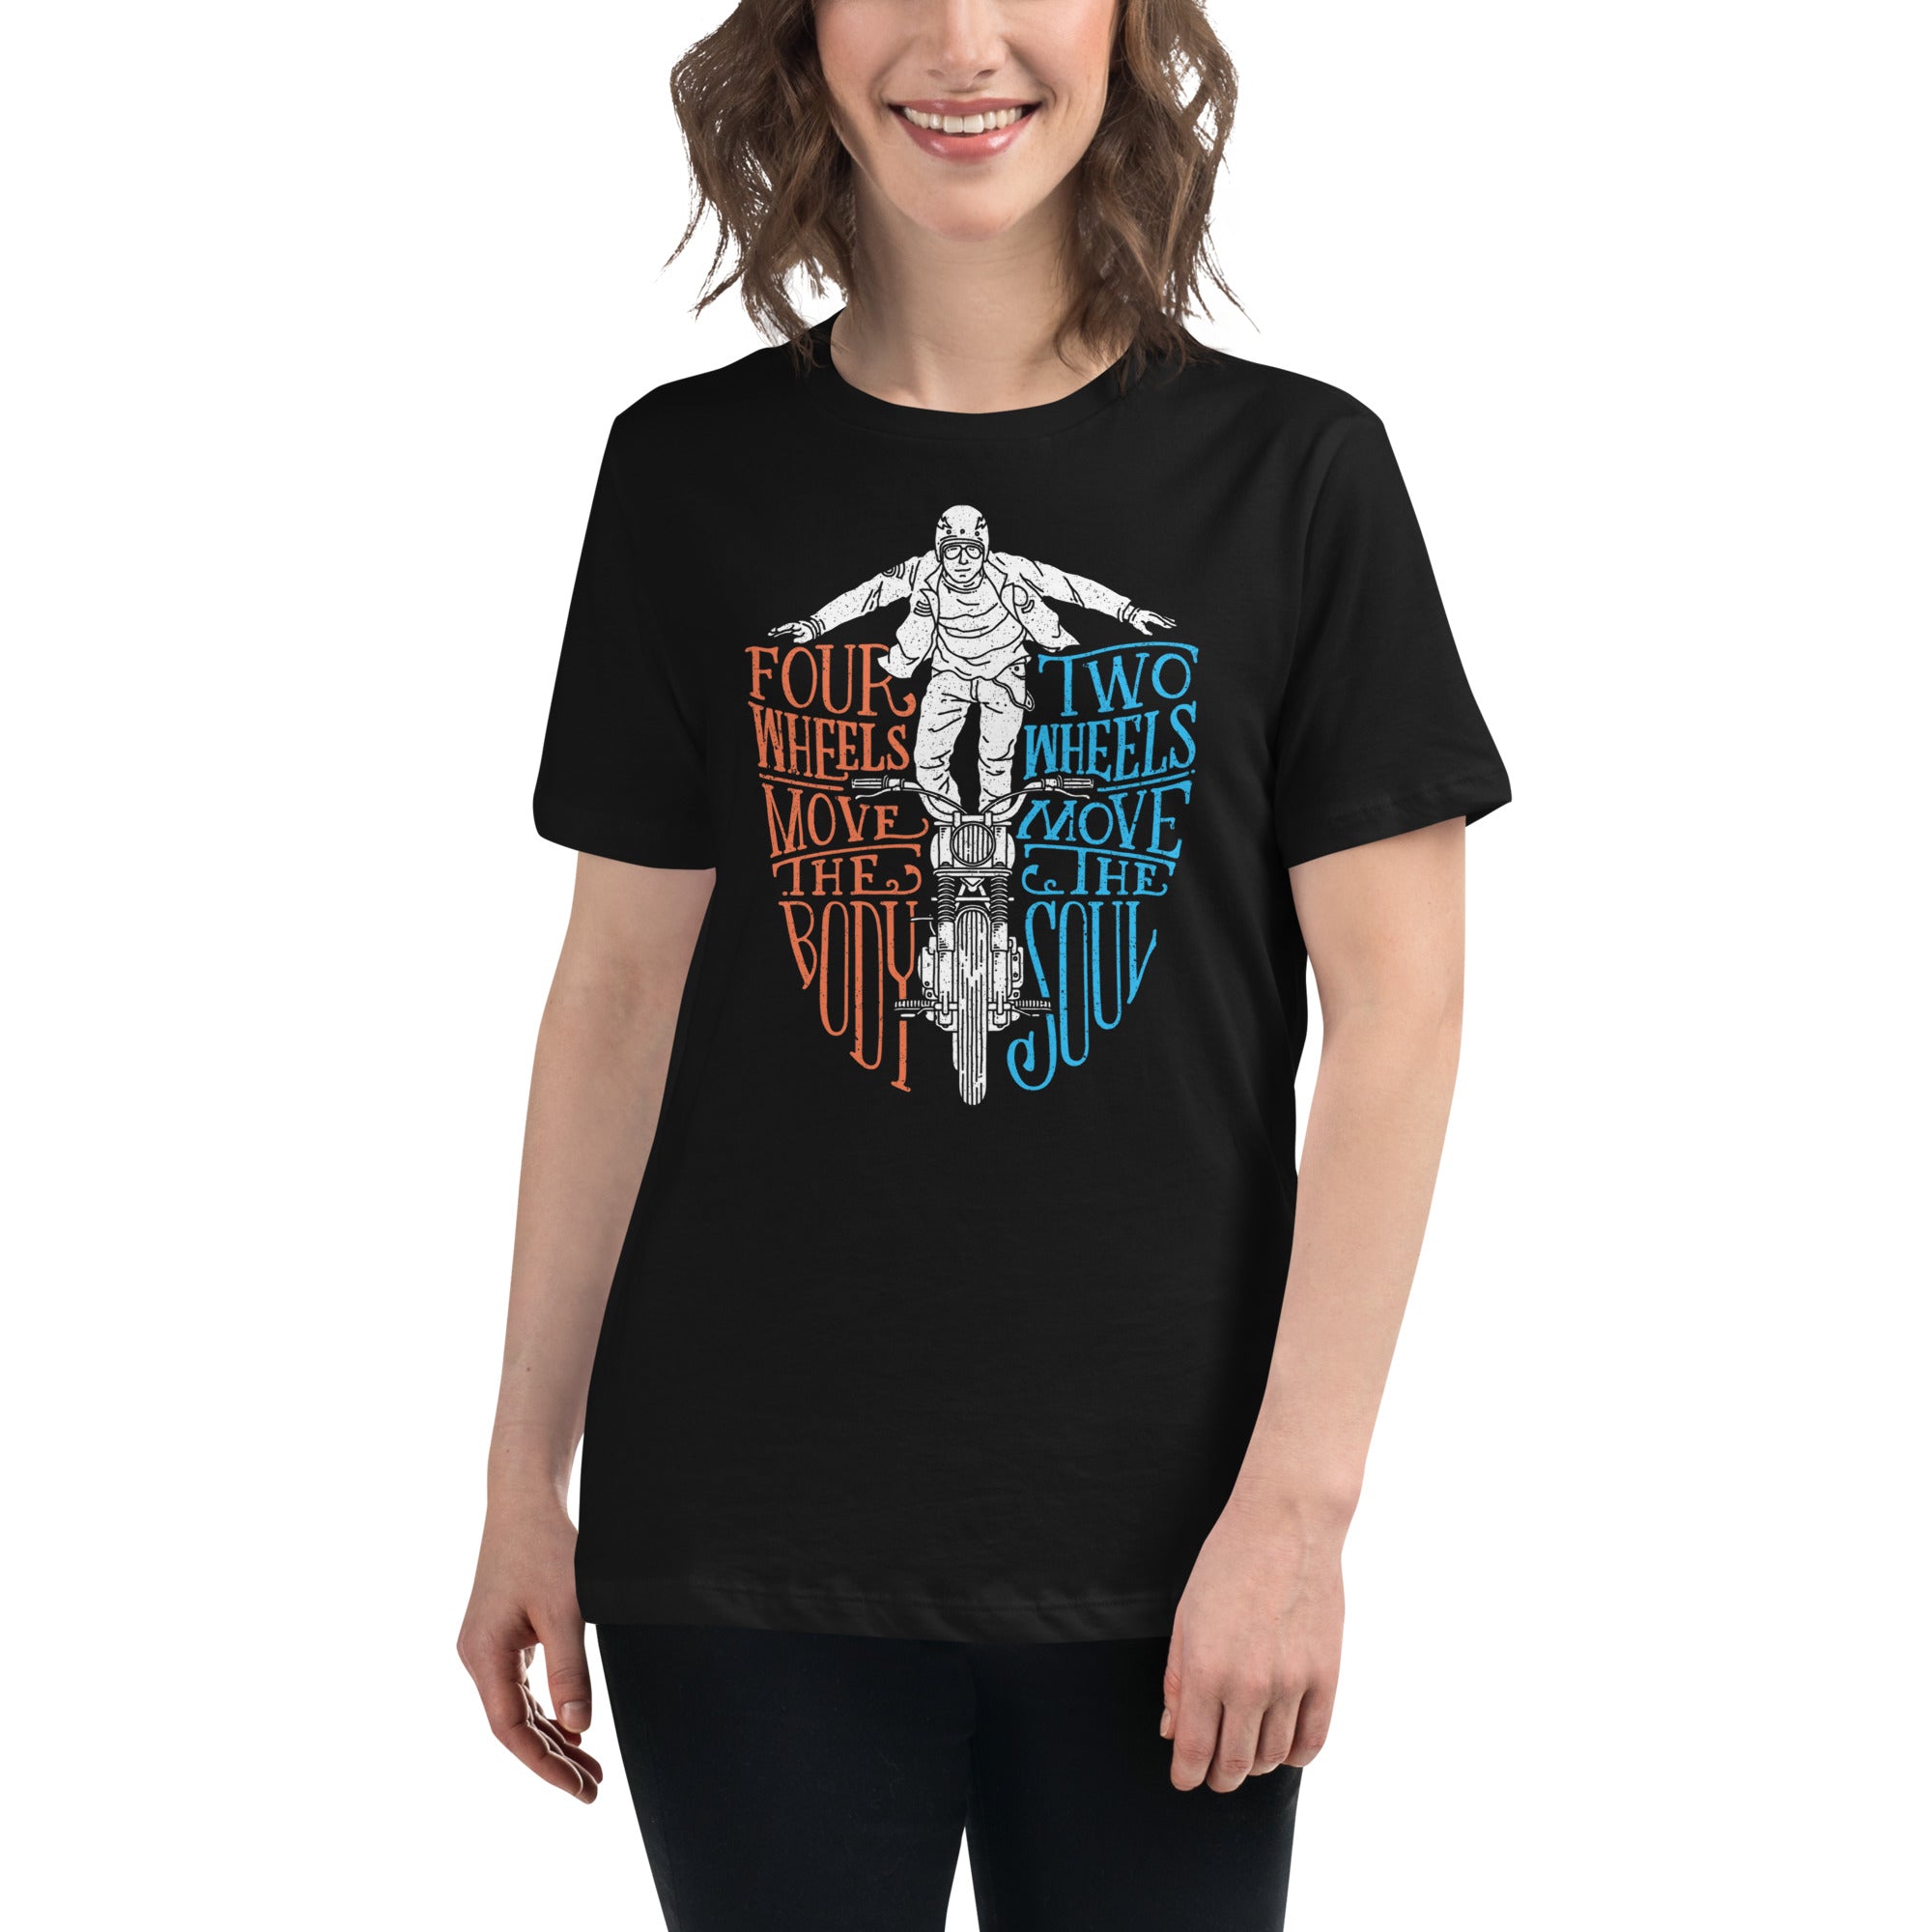 Move the Soul Tee - Women's